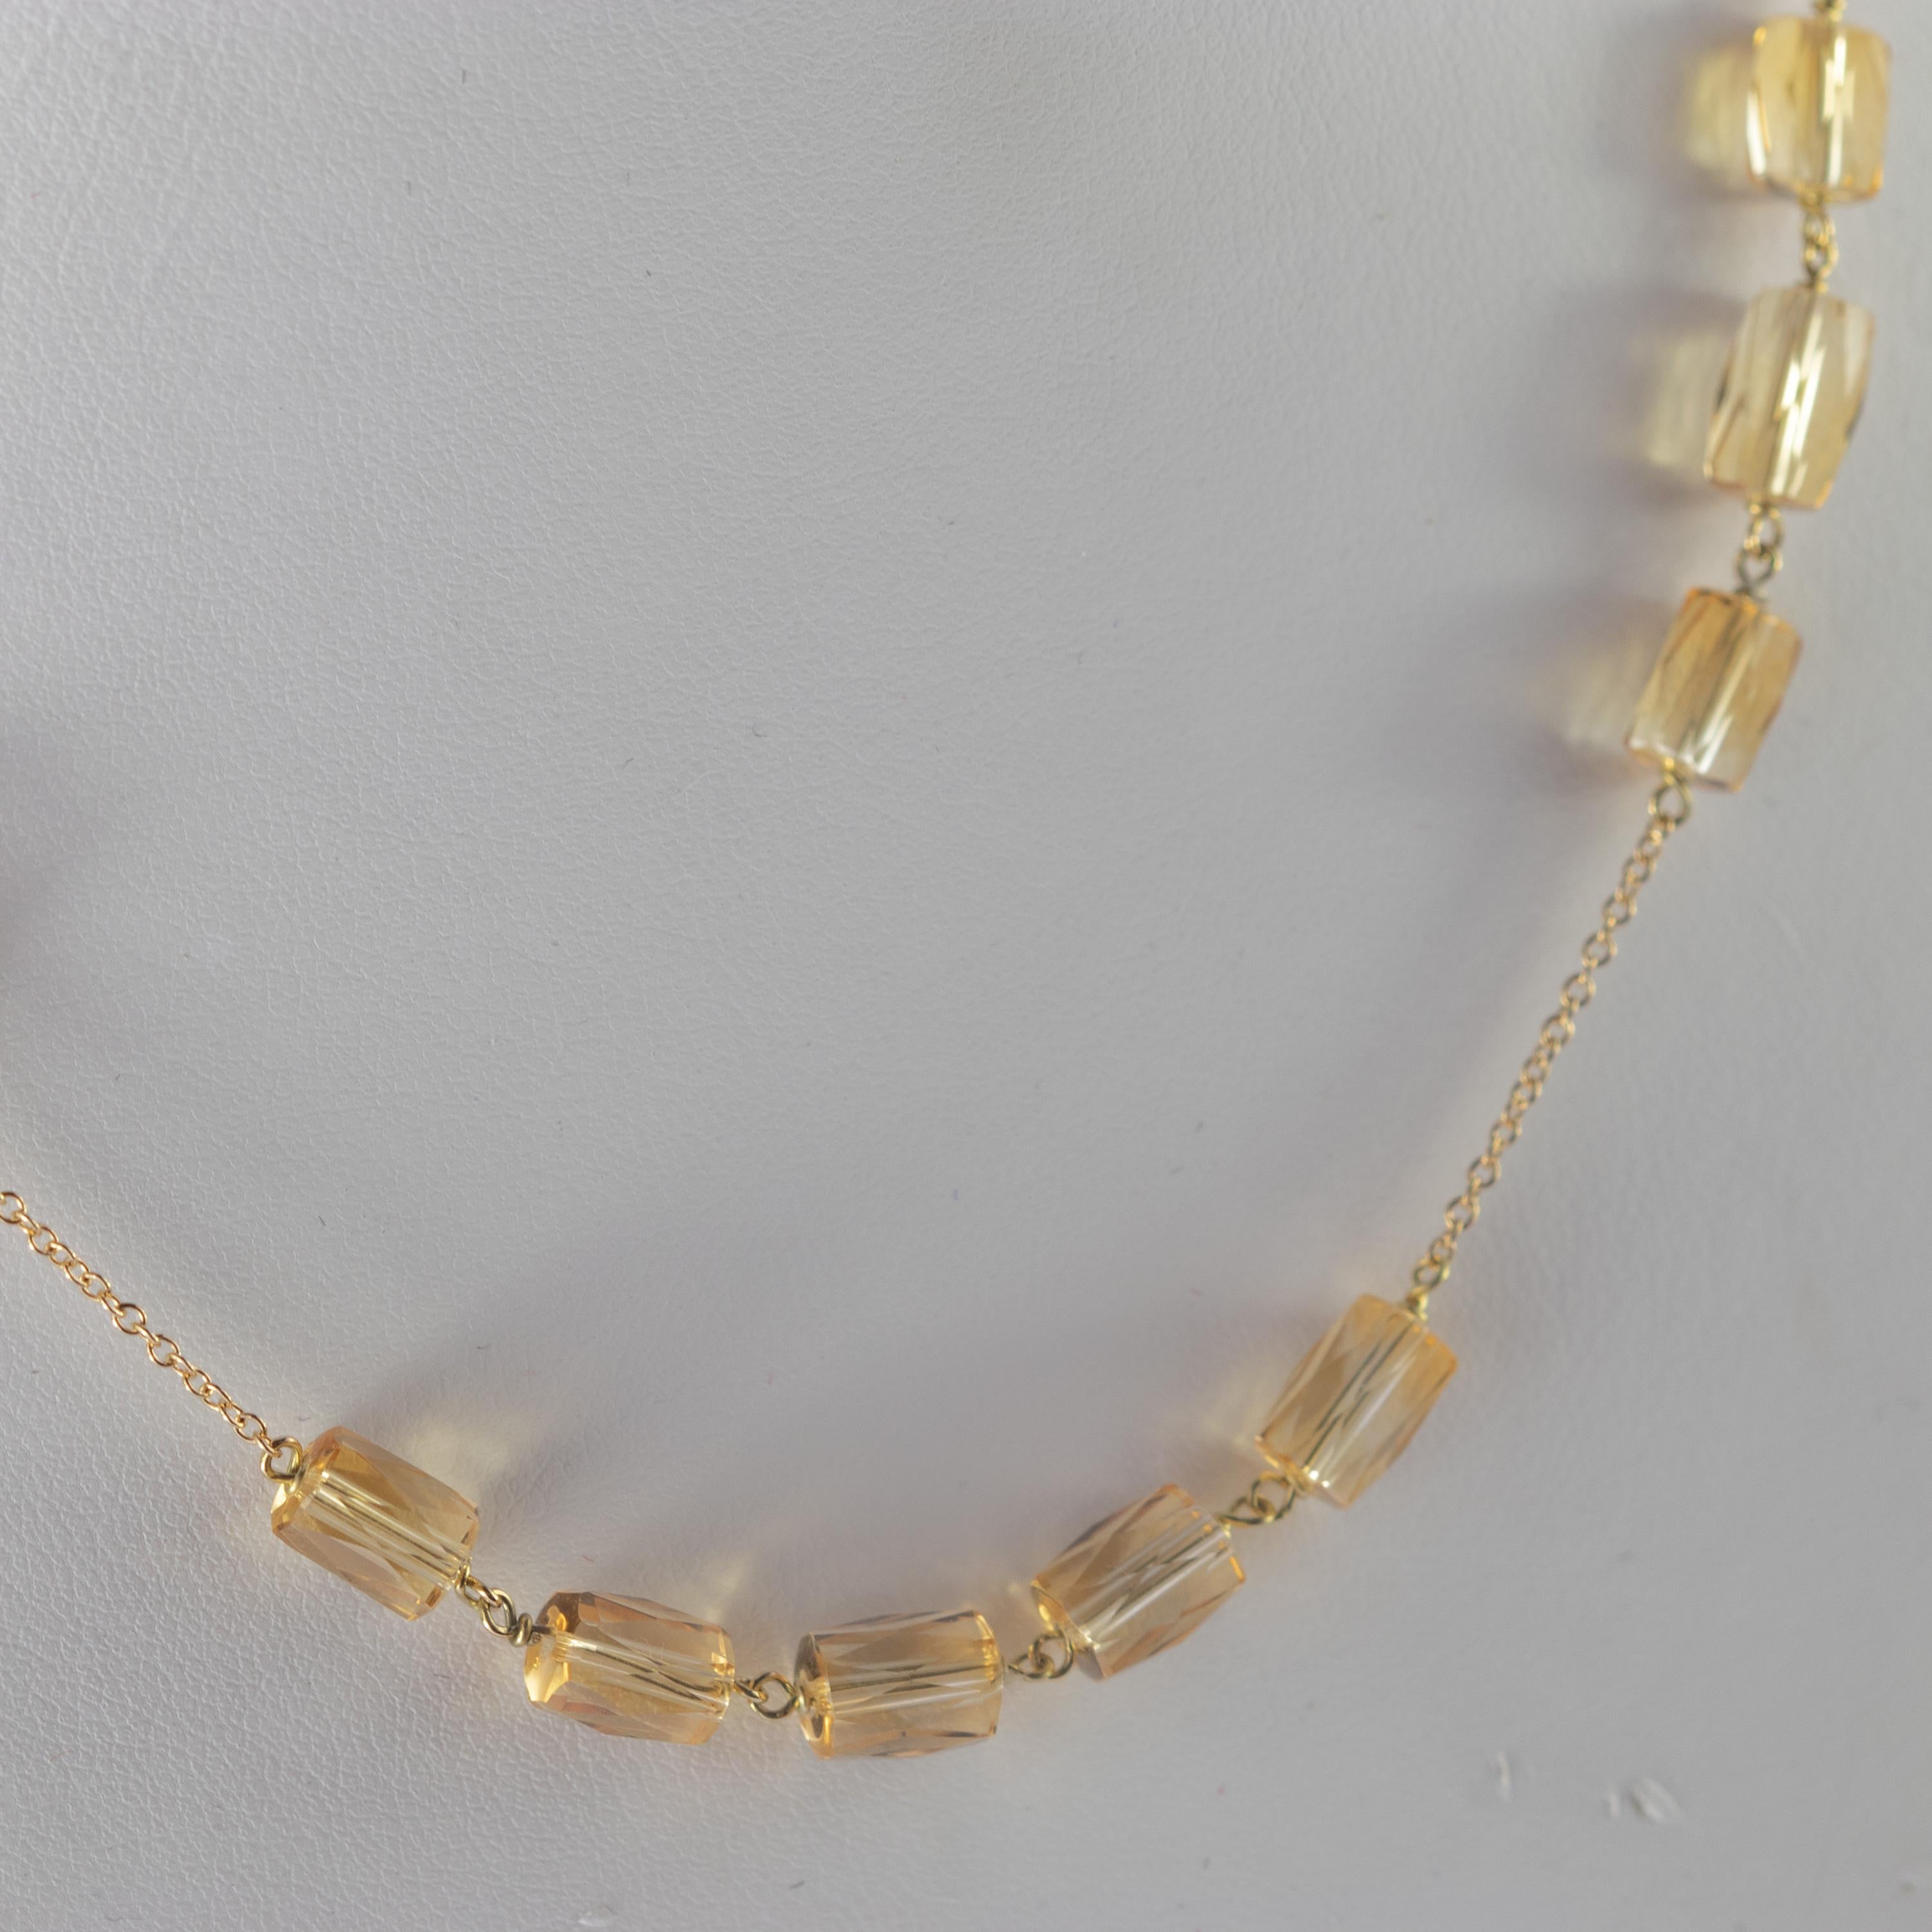 IIntini Jewels signature quality on a modern and contemporary design jewel.

Thirteen gems of top quality pure citrine quartz embellish a delicate Gold Plate chain necklace.
 
An elegant touch of glamour at your fingertips. Let yourself be tempted